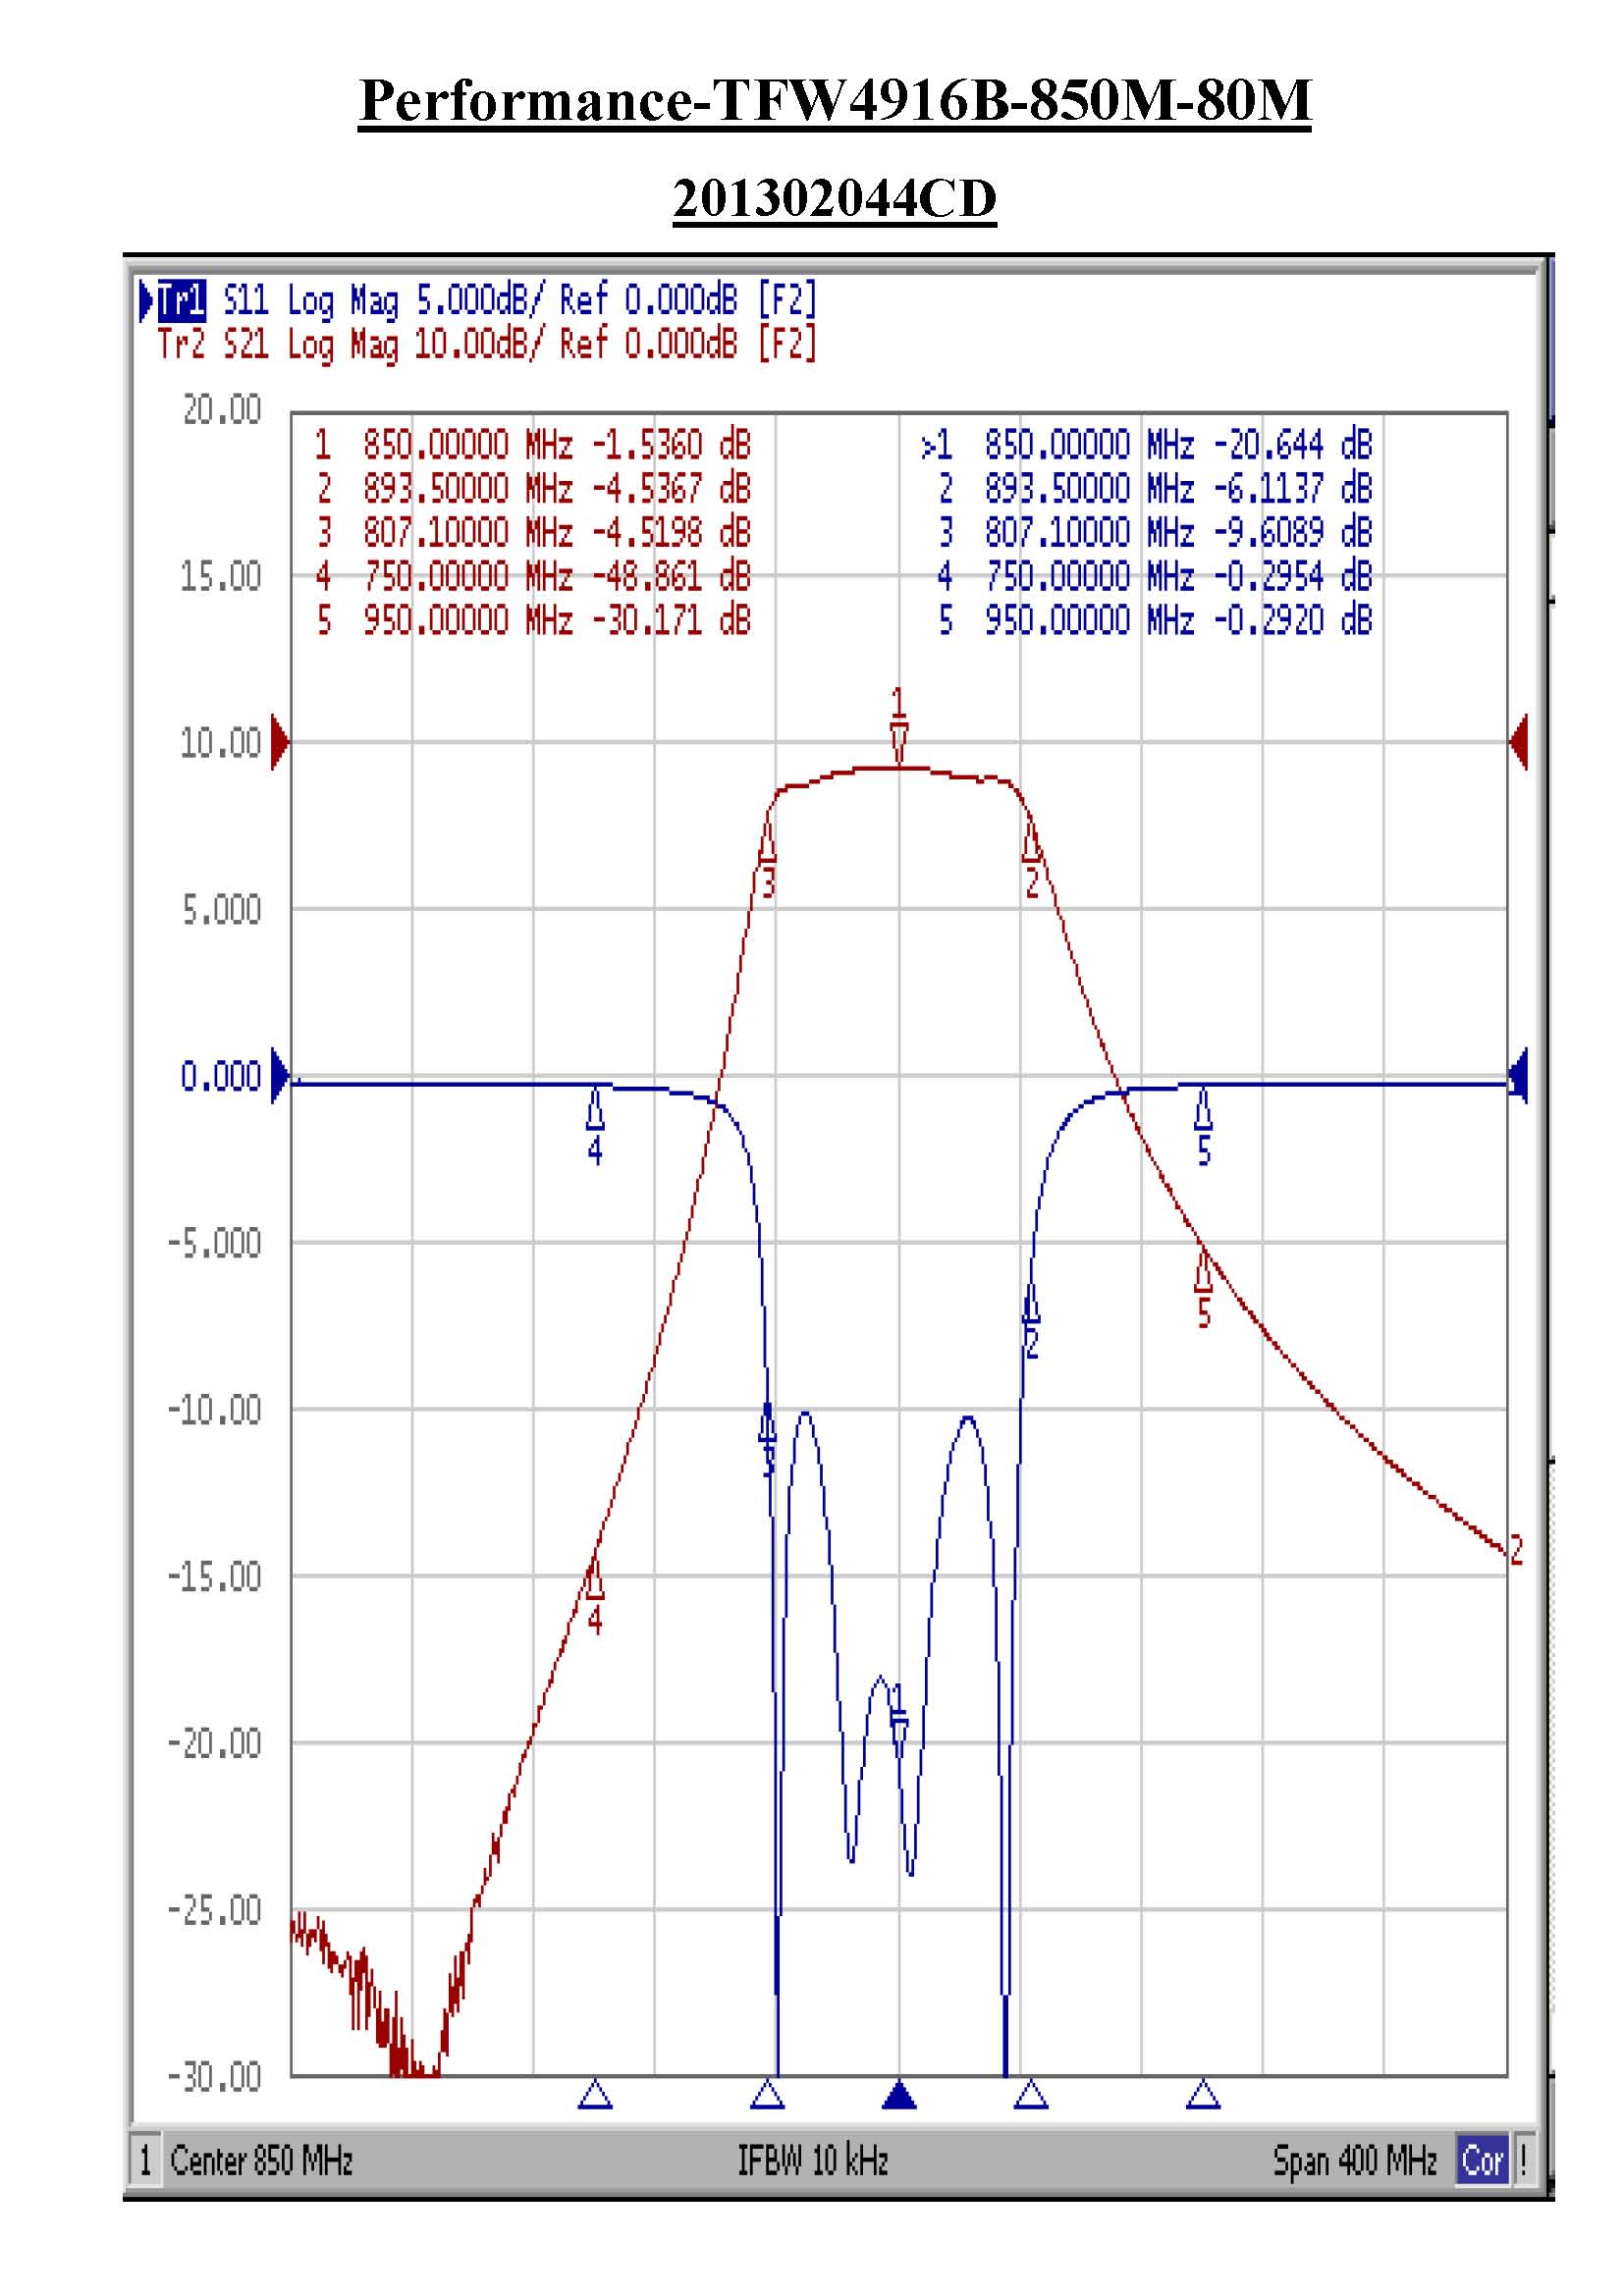 TFW4916B-850M Helical Tunable Bandpass Filter